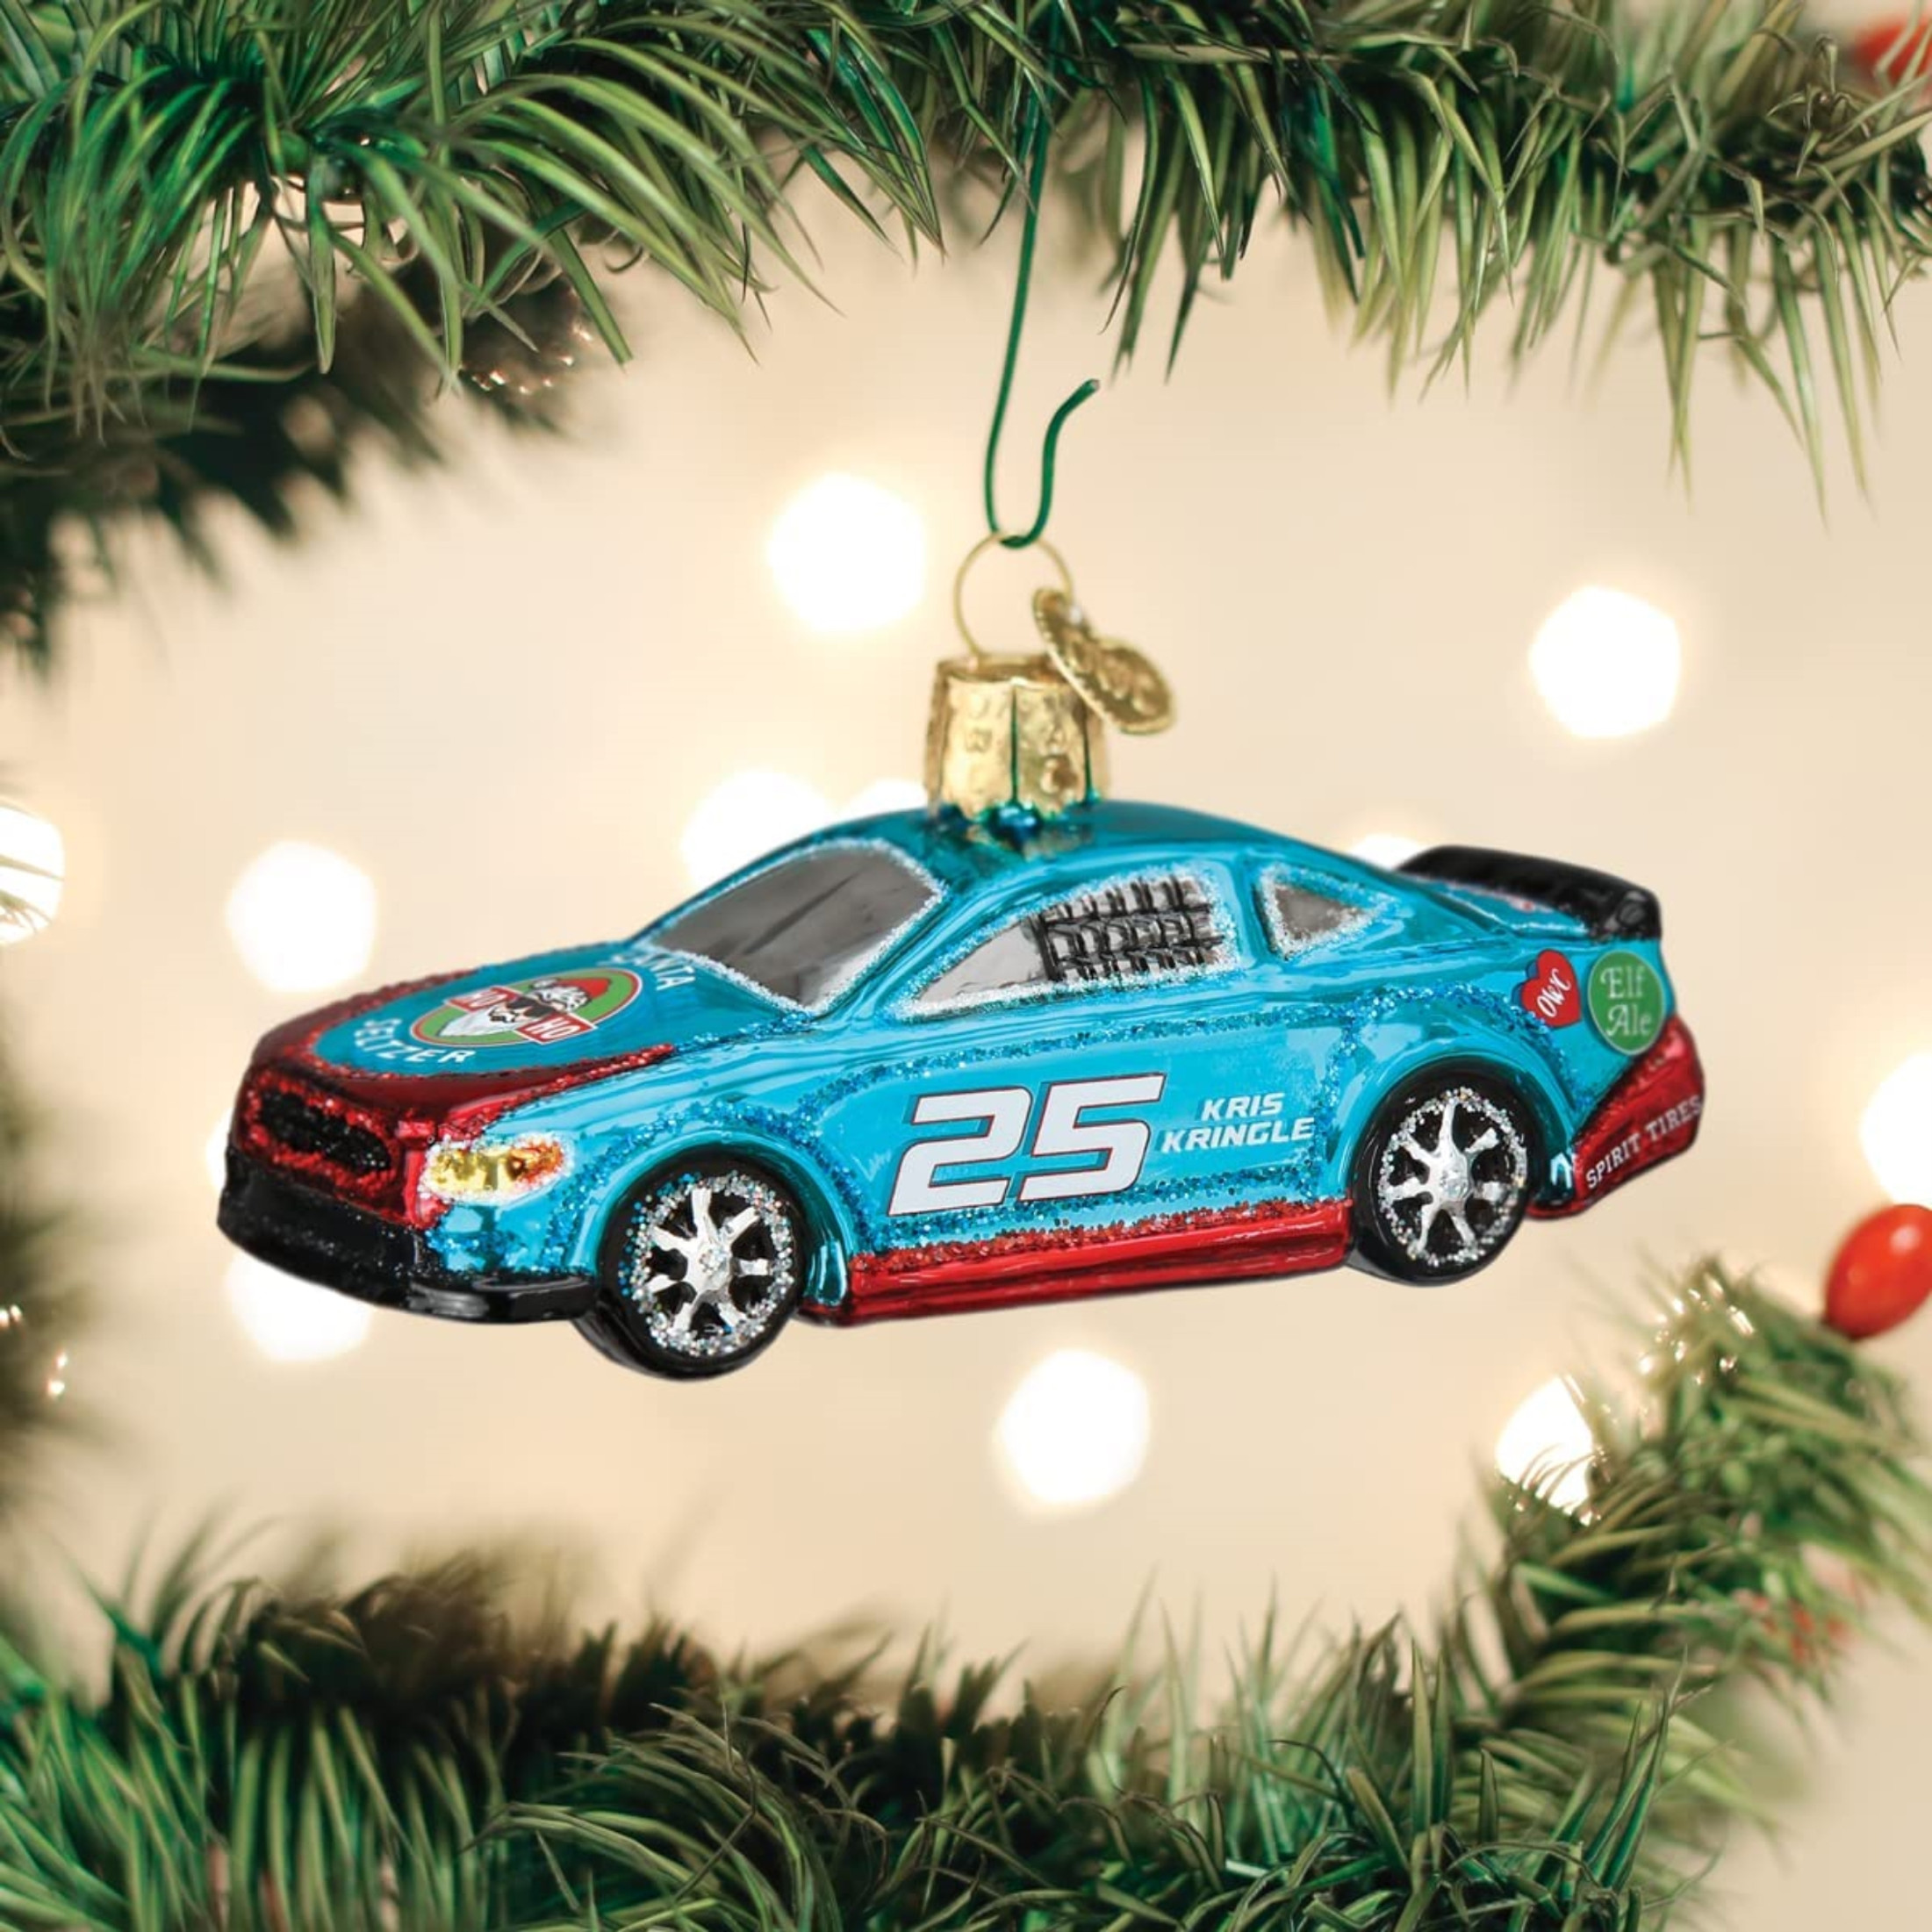 Old World Christmas Glass Blown Racing Sports Car Ornament, 4"